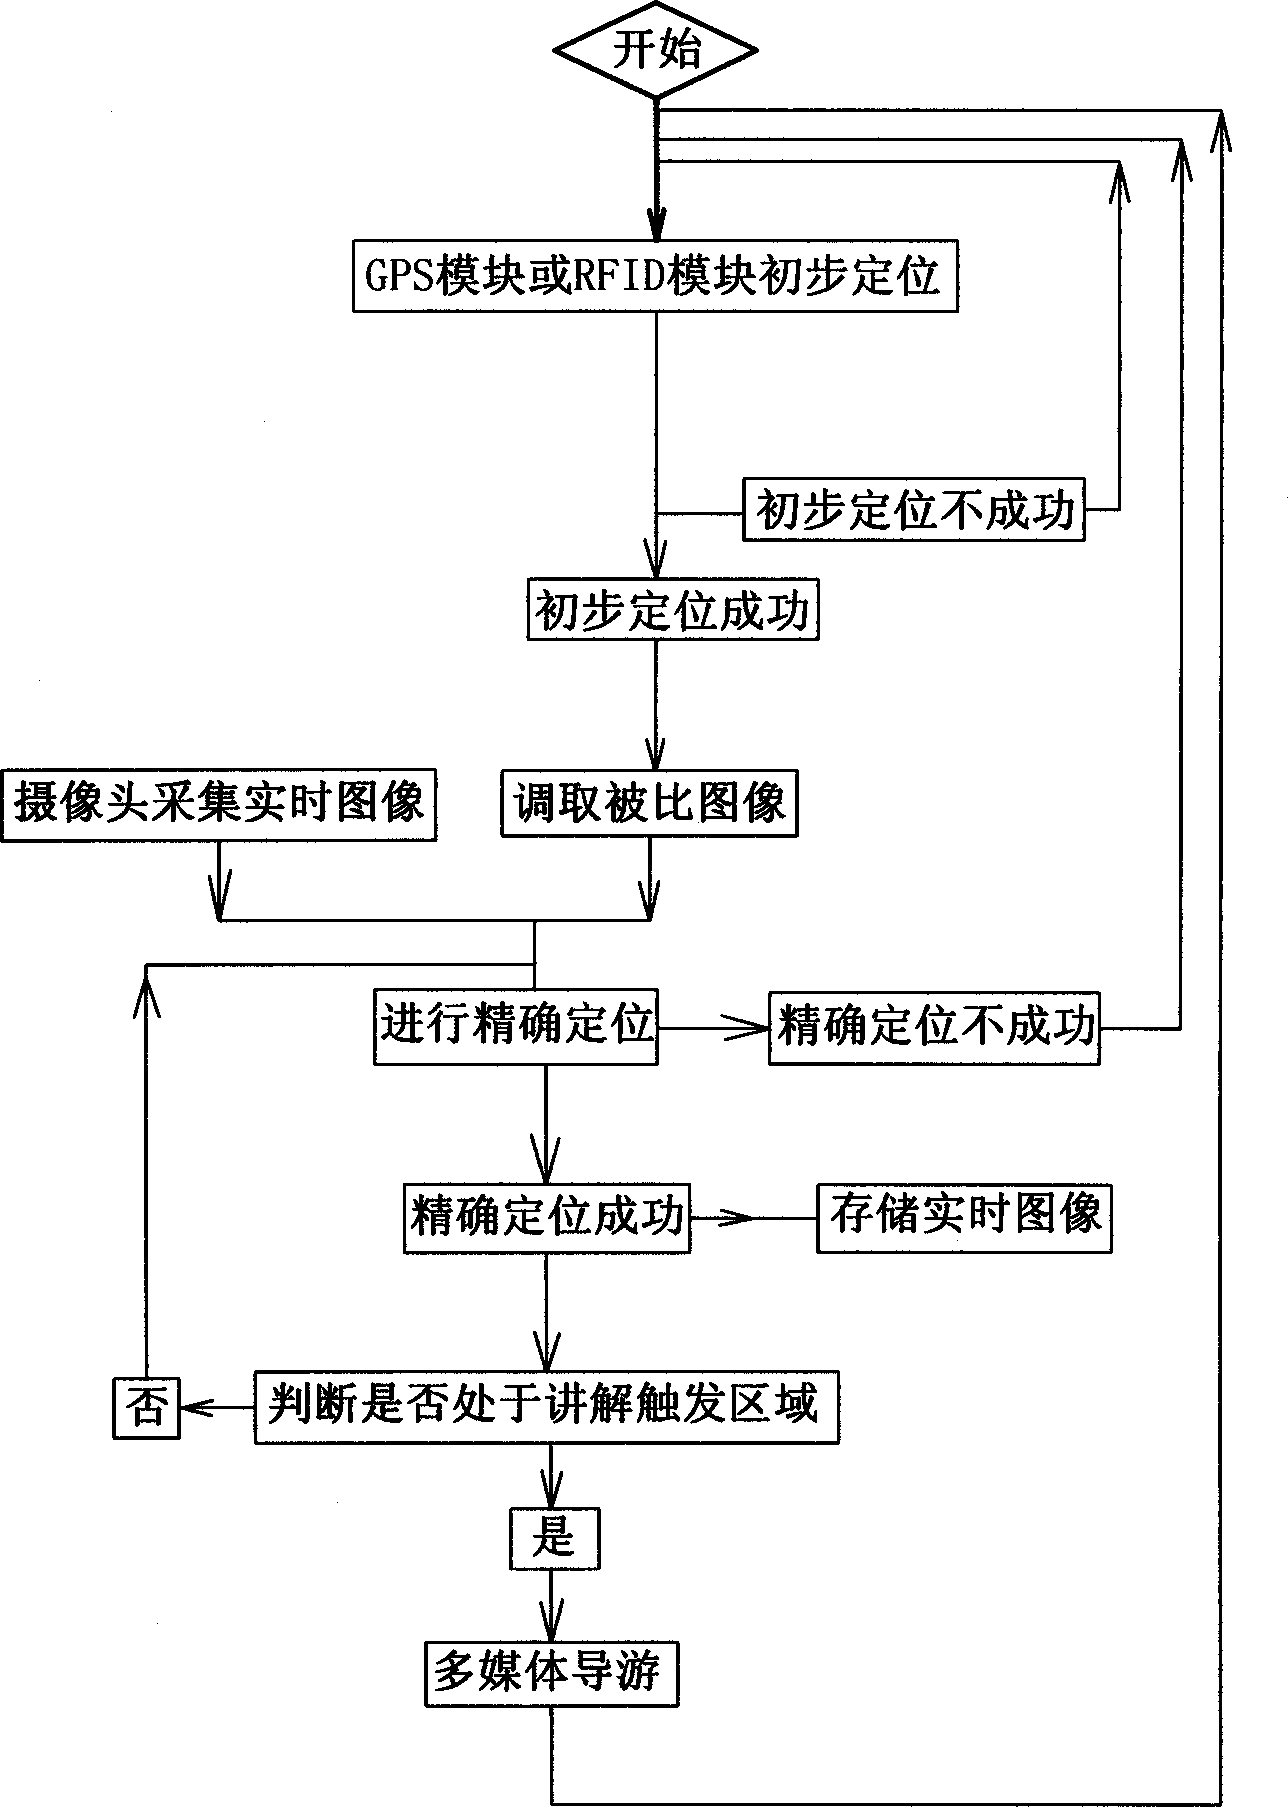 Adaptive localization self-help tour guide method and system